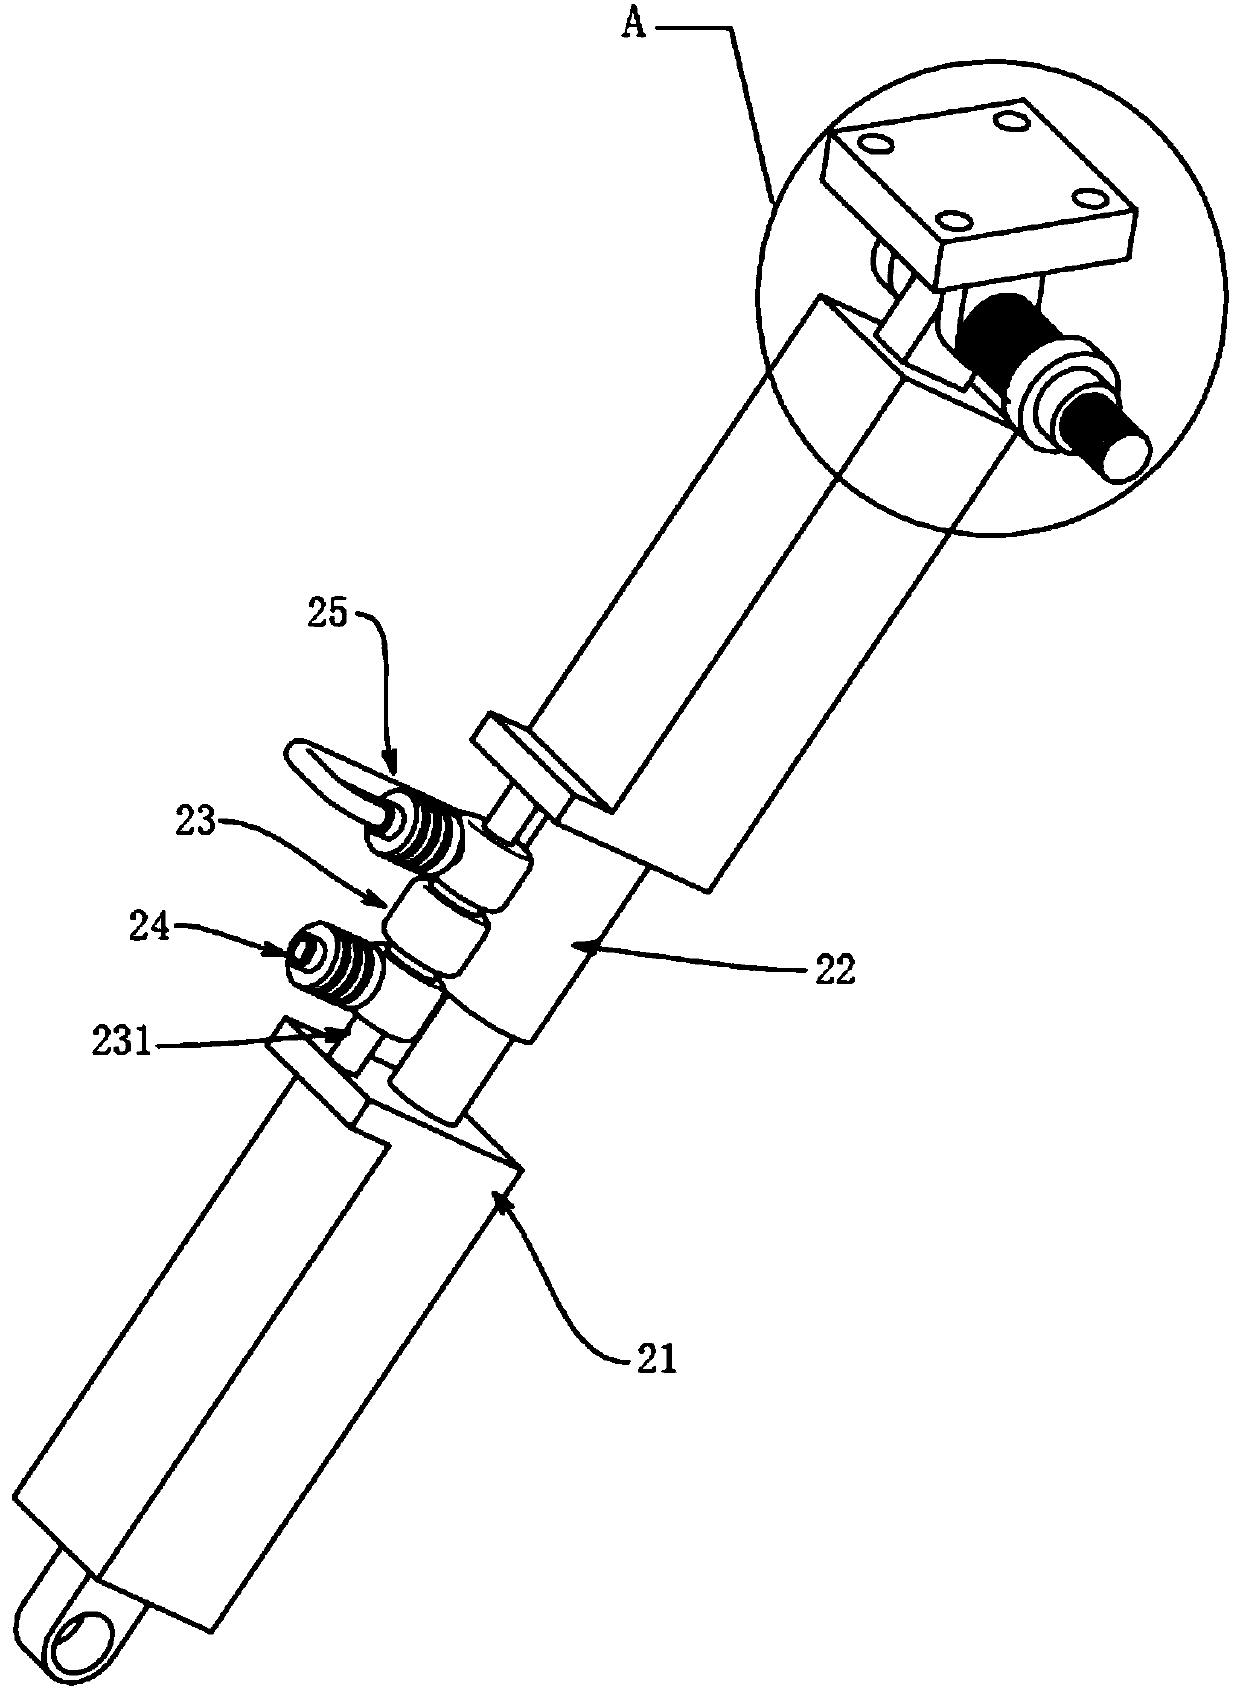 Vibration reducing support for pipeline hoisting